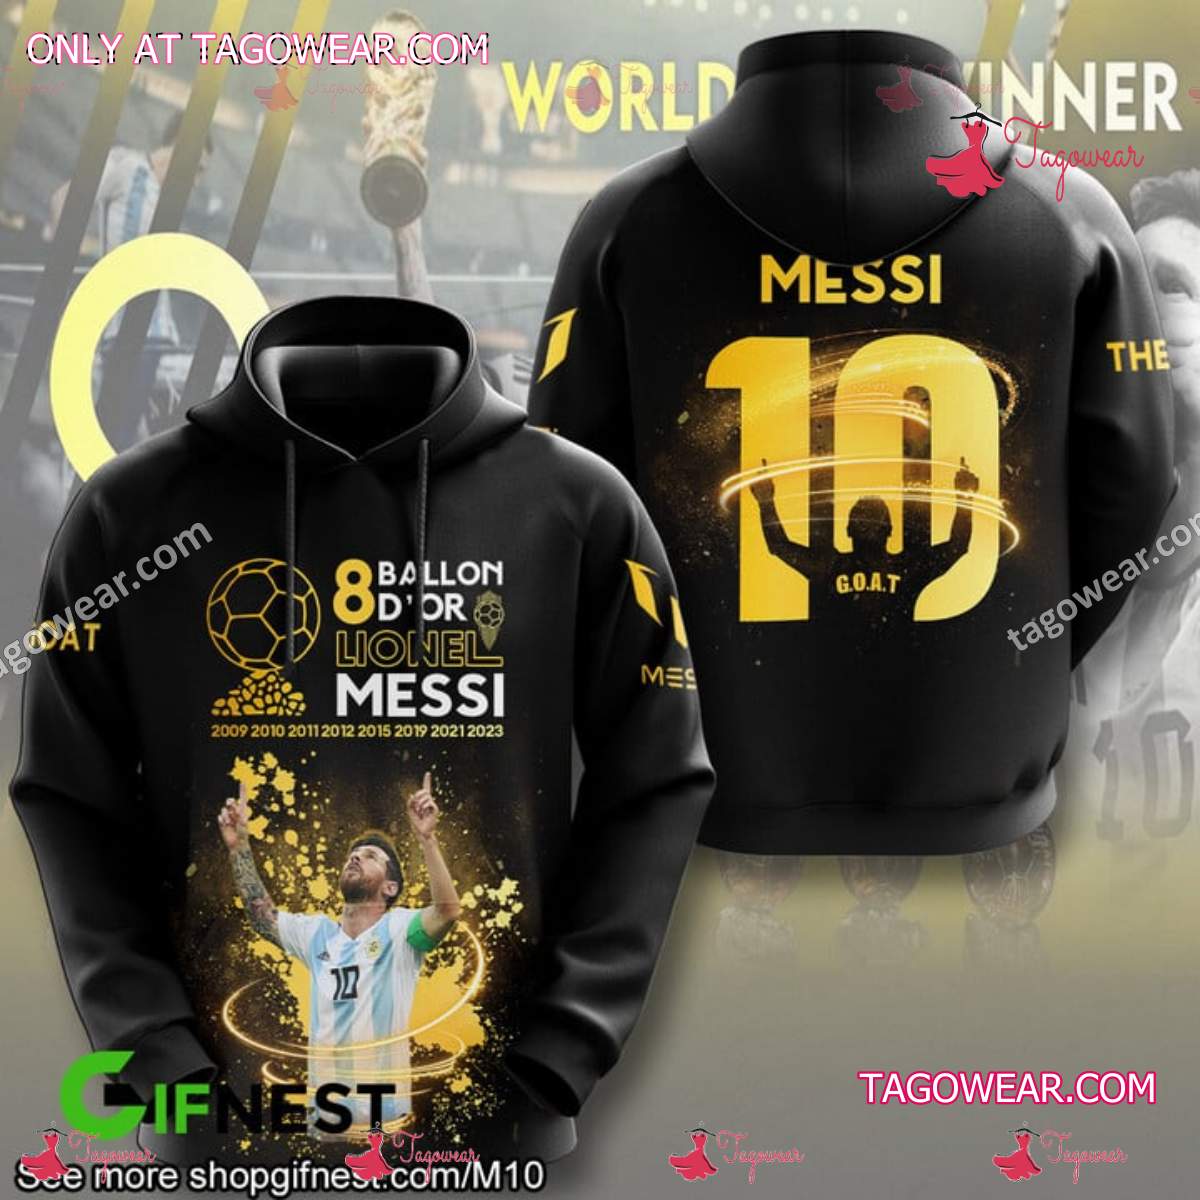 8 Ballon D'or Lionel Messi The Goat T-shirt, Hoodie a